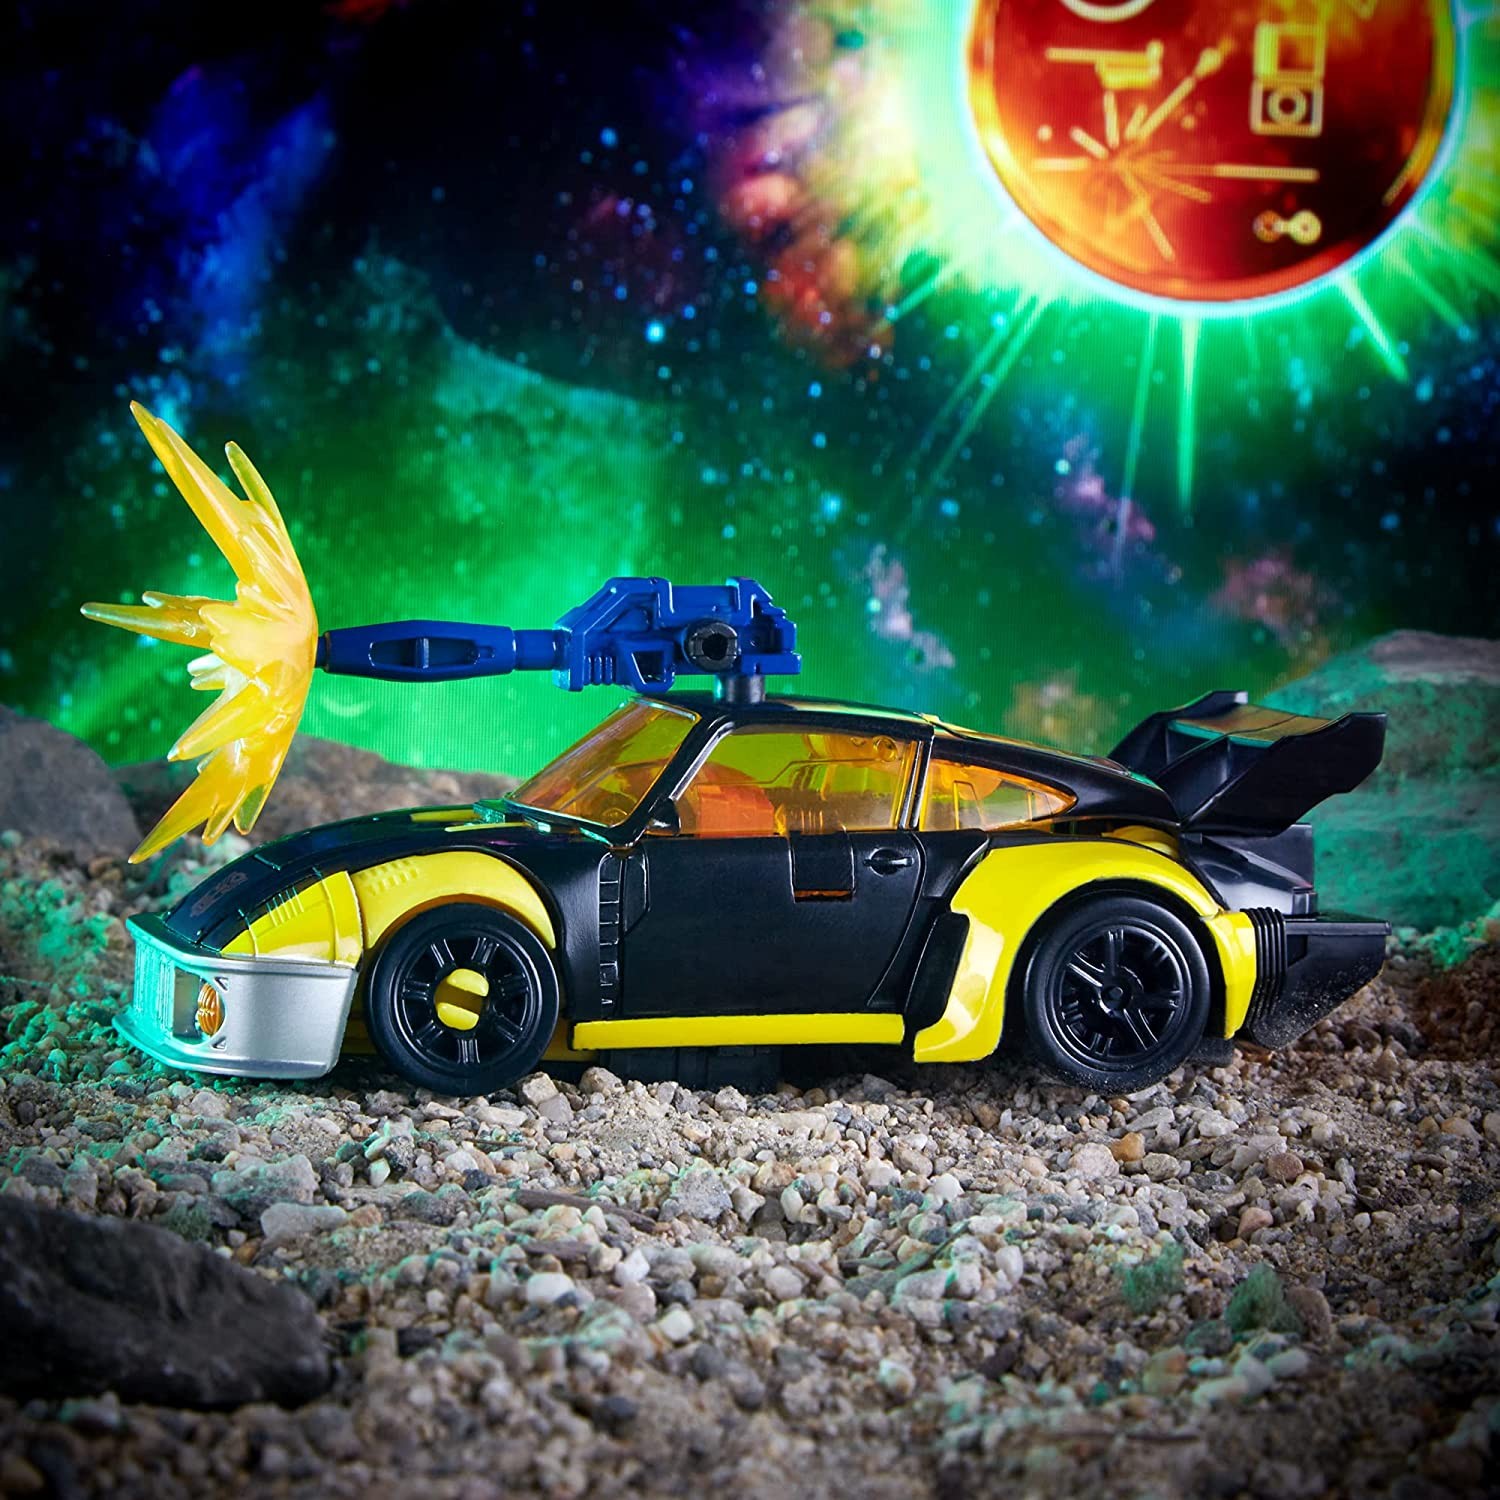 Transformers News: Transformers Kingdom Golden Disk Chapter 2 Set Revealed as Jackpot and Sights